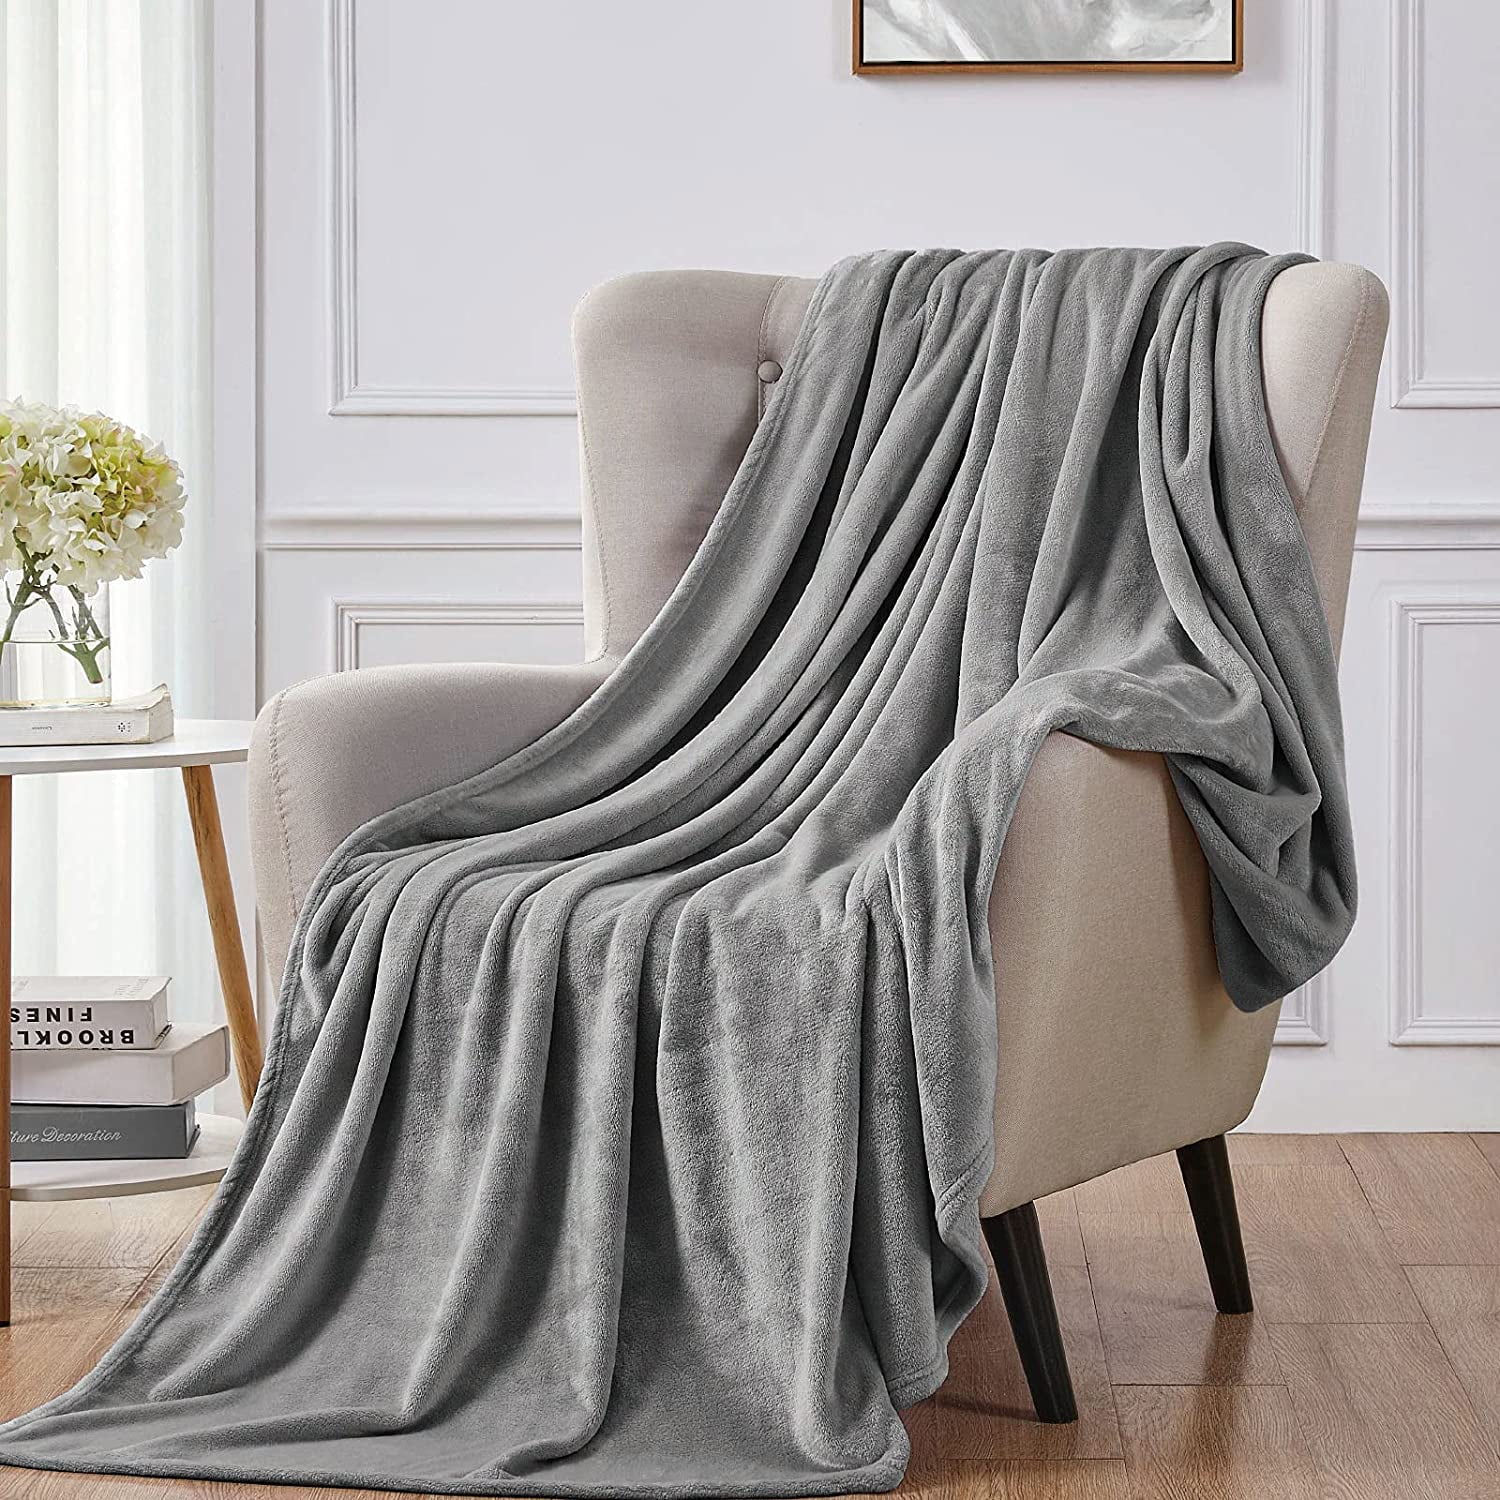 Luxury Grey Fleece Throw Blanket Full Queen Size Solid Color Weighted Throw Cozy Super Soft Warming Blanket For Bed Sofa Couch Adults Travel Casual Style Bedding Lightweight Plush Fuzzy Polyester 